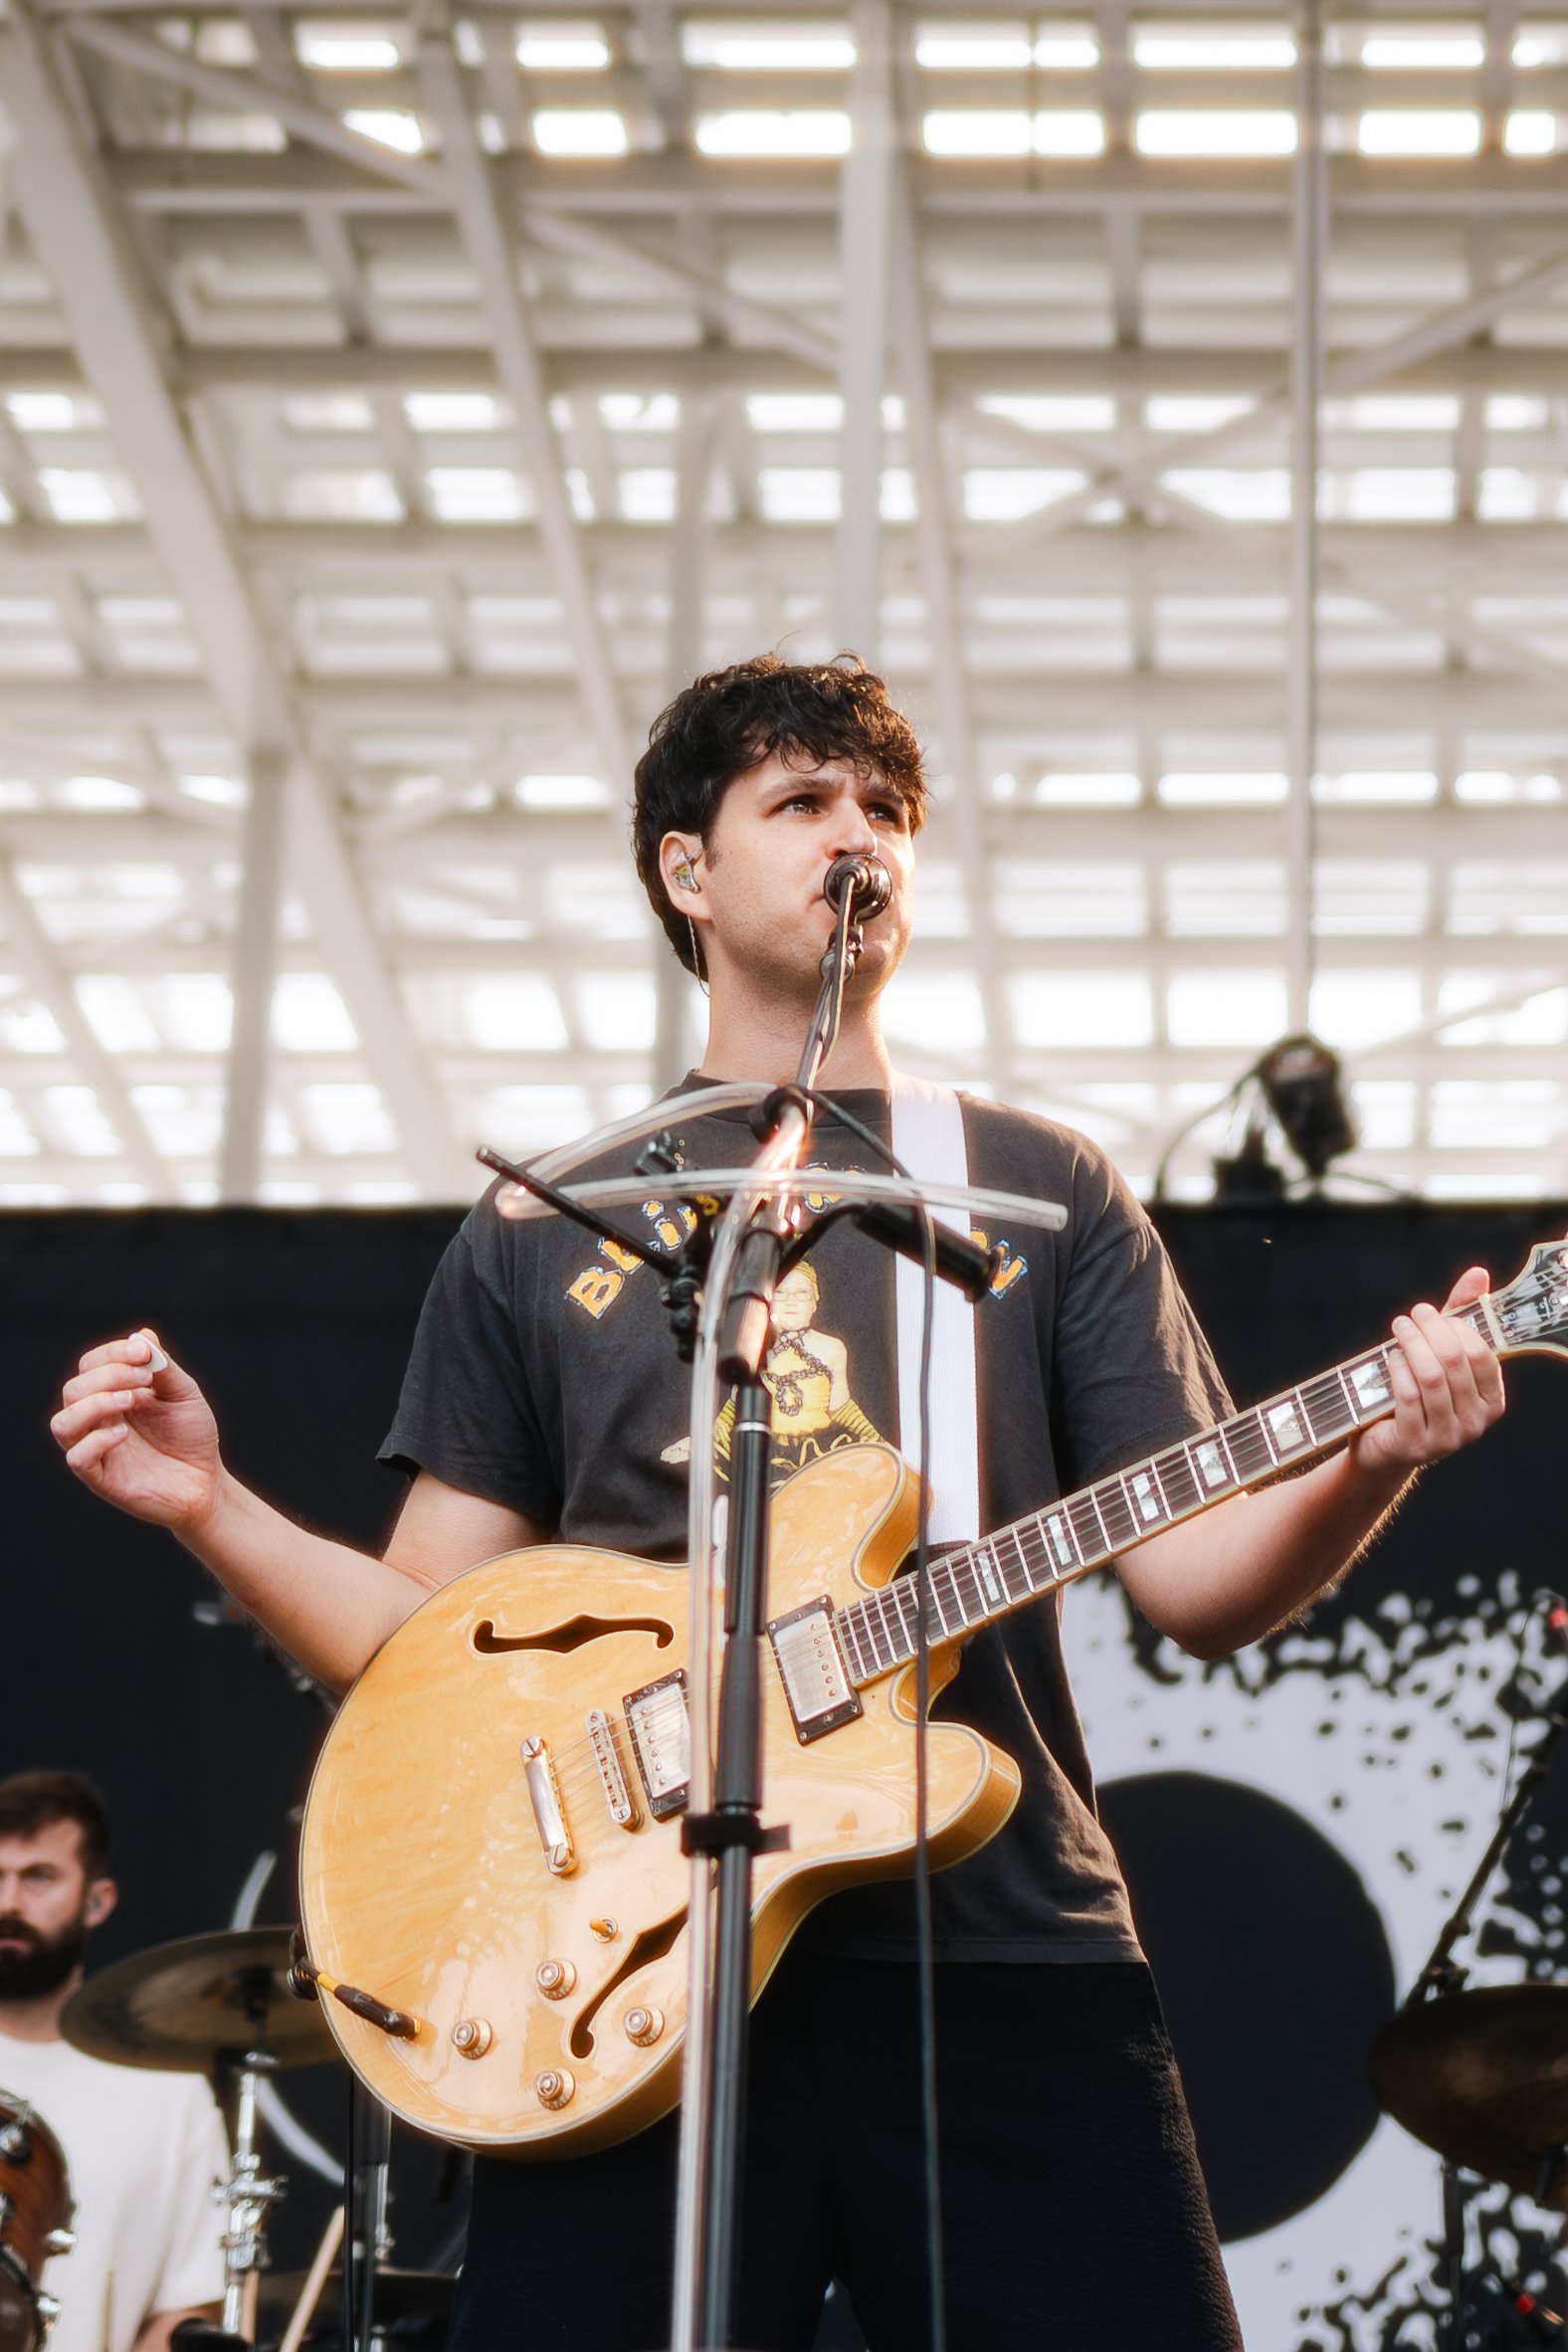  Ezra Koenig sings and plays guitar for the live debut of “Ice Cream Piano” from Vampire Weekend’s new album,  Only God Was Above Us . 